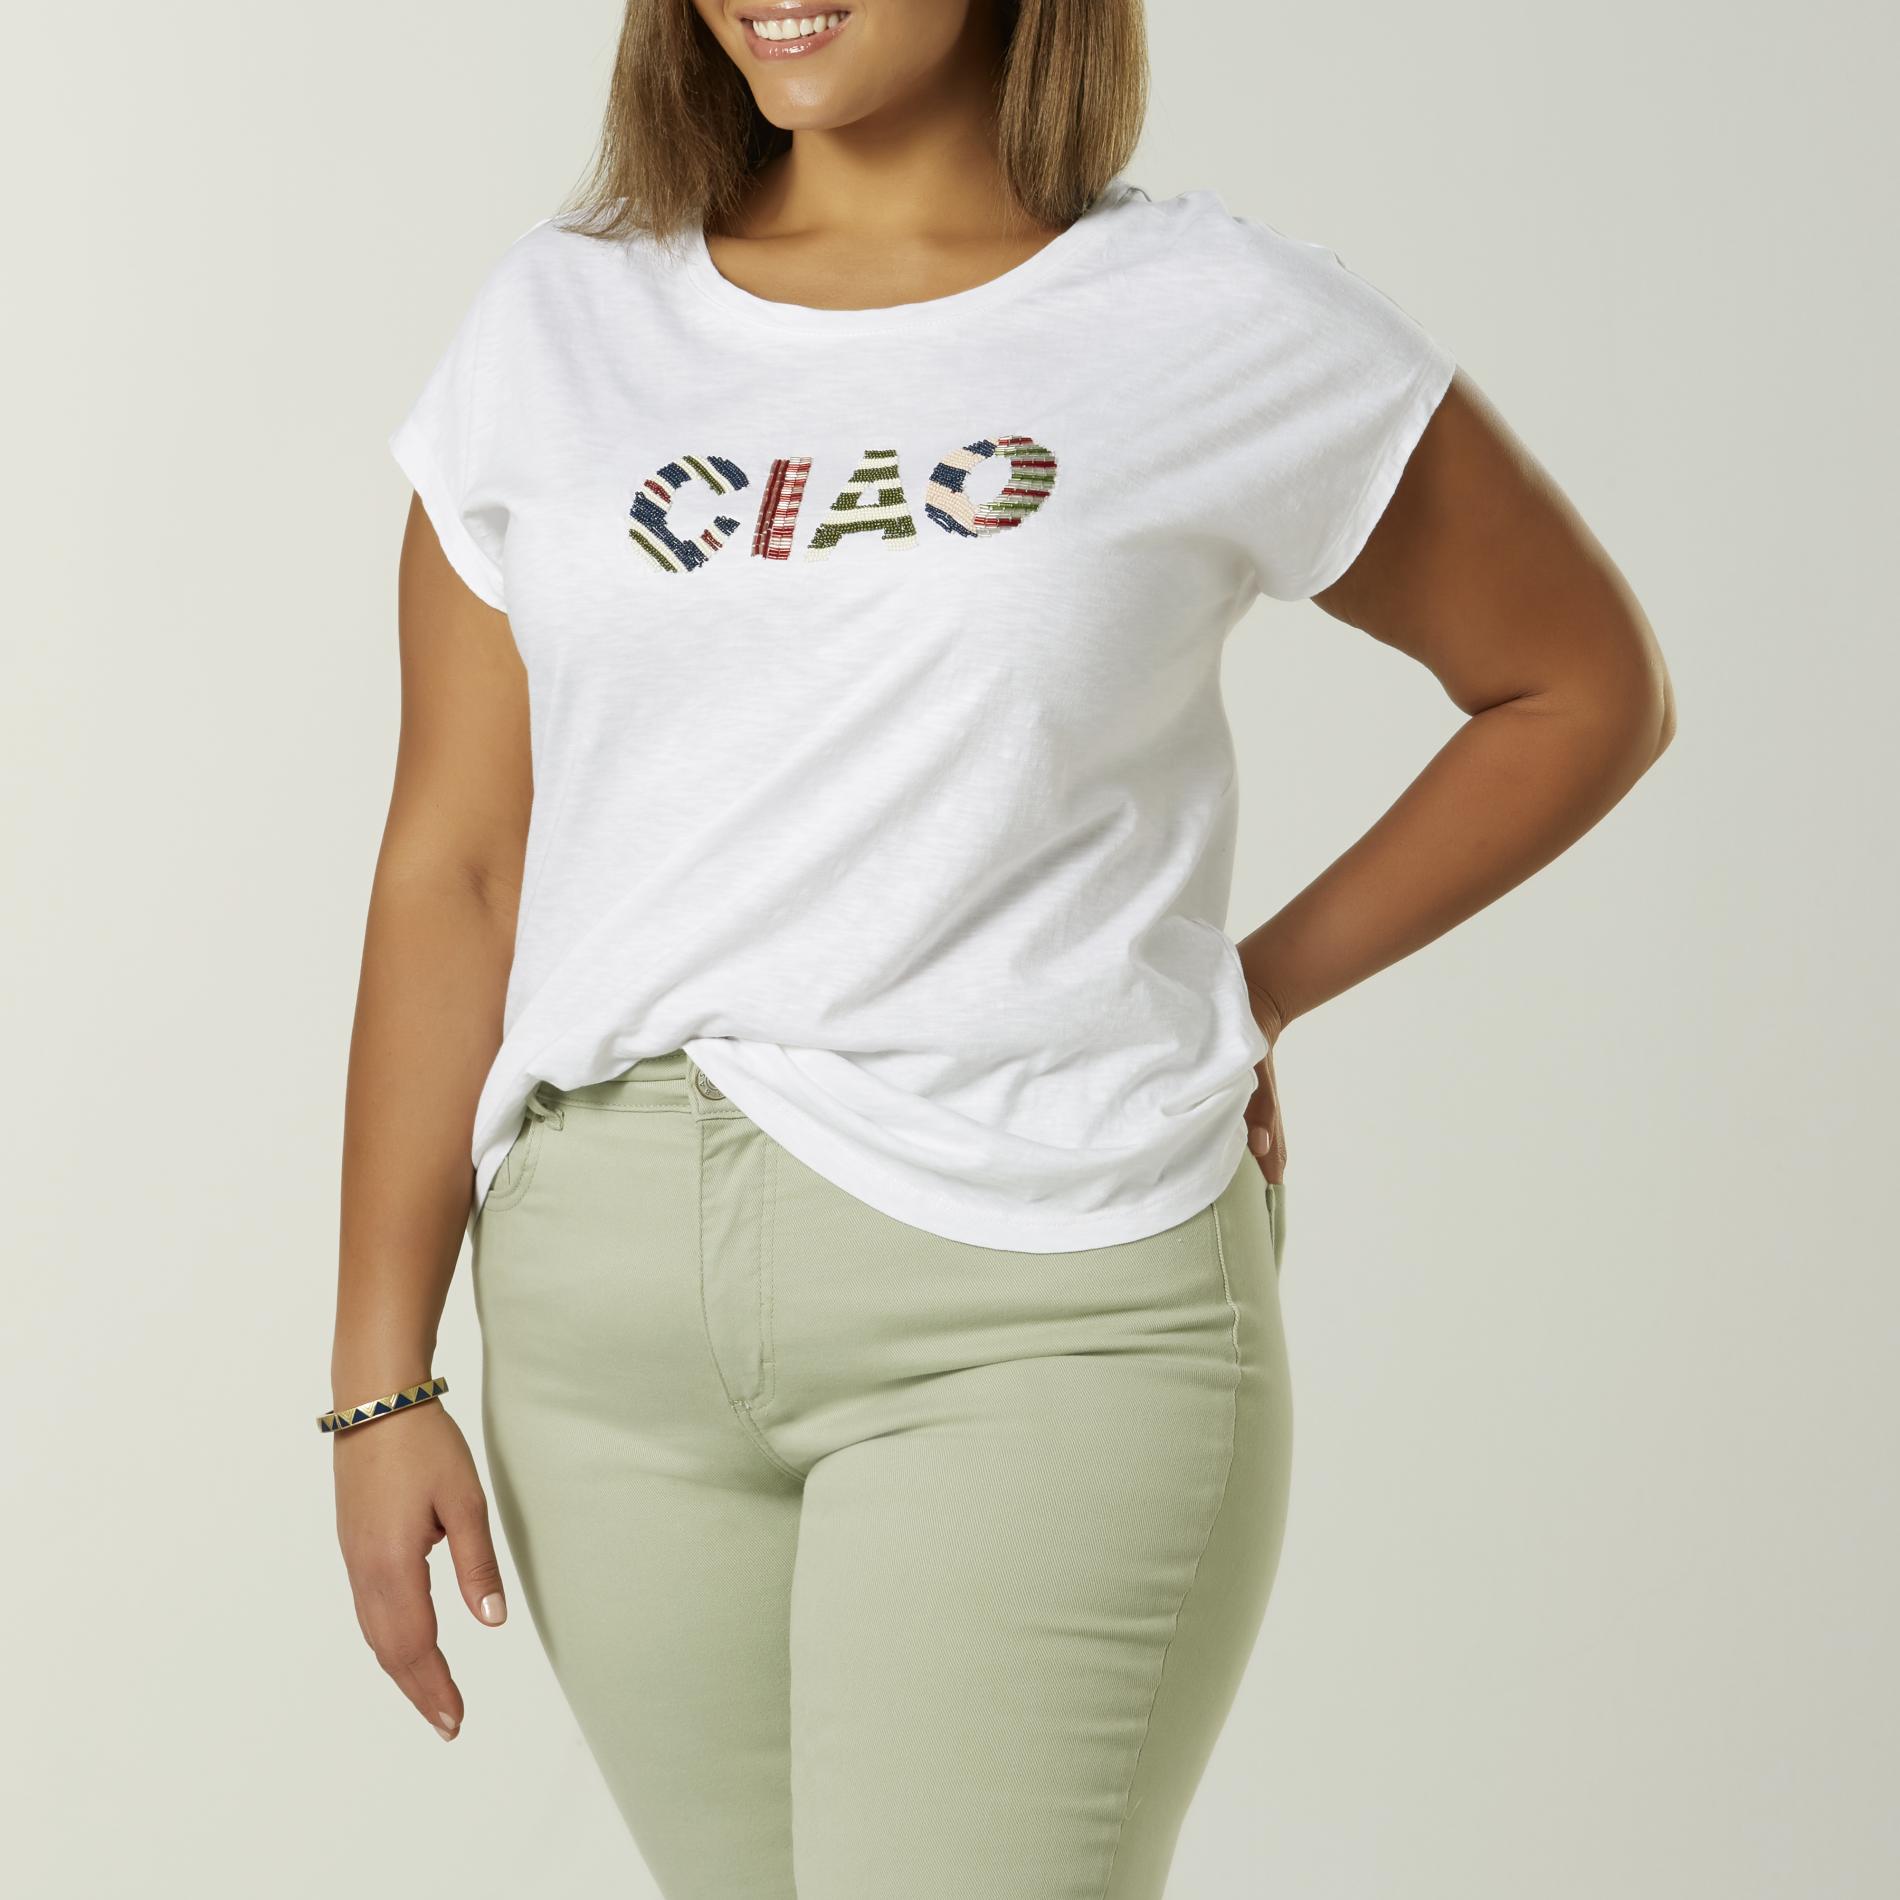 Simply Emma Women's Plus Embellished T-Shirt - Ciao